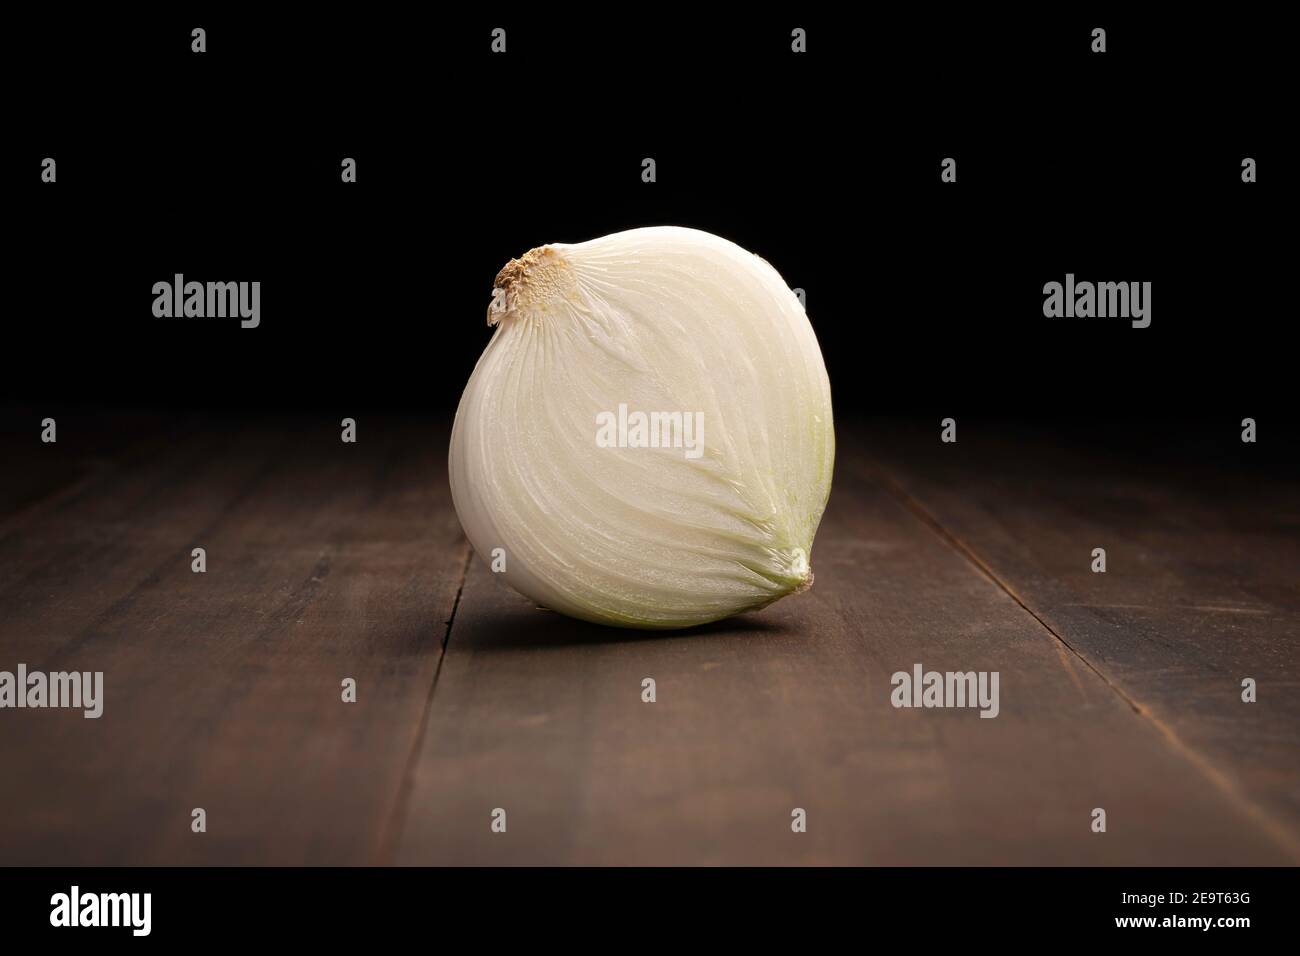 image of a half an onion close up on rustic wooden surface and black background Stock Photo